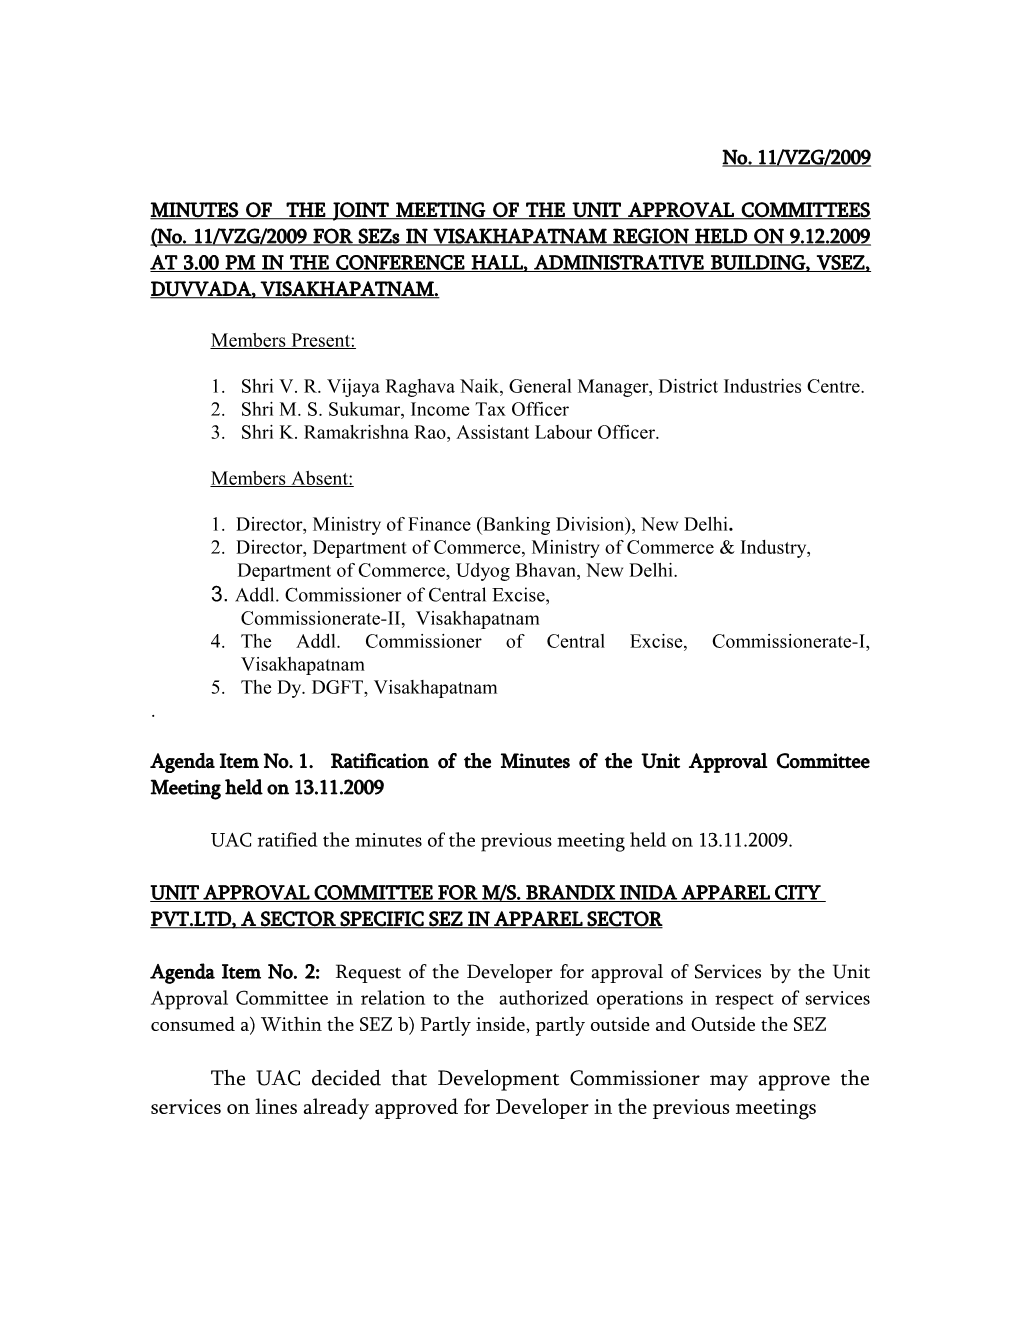 MINUTES of the JOINT MEETING of the UNIT APPROVAL COMMITTEES (No. 11/VZG/2009 for Sezs